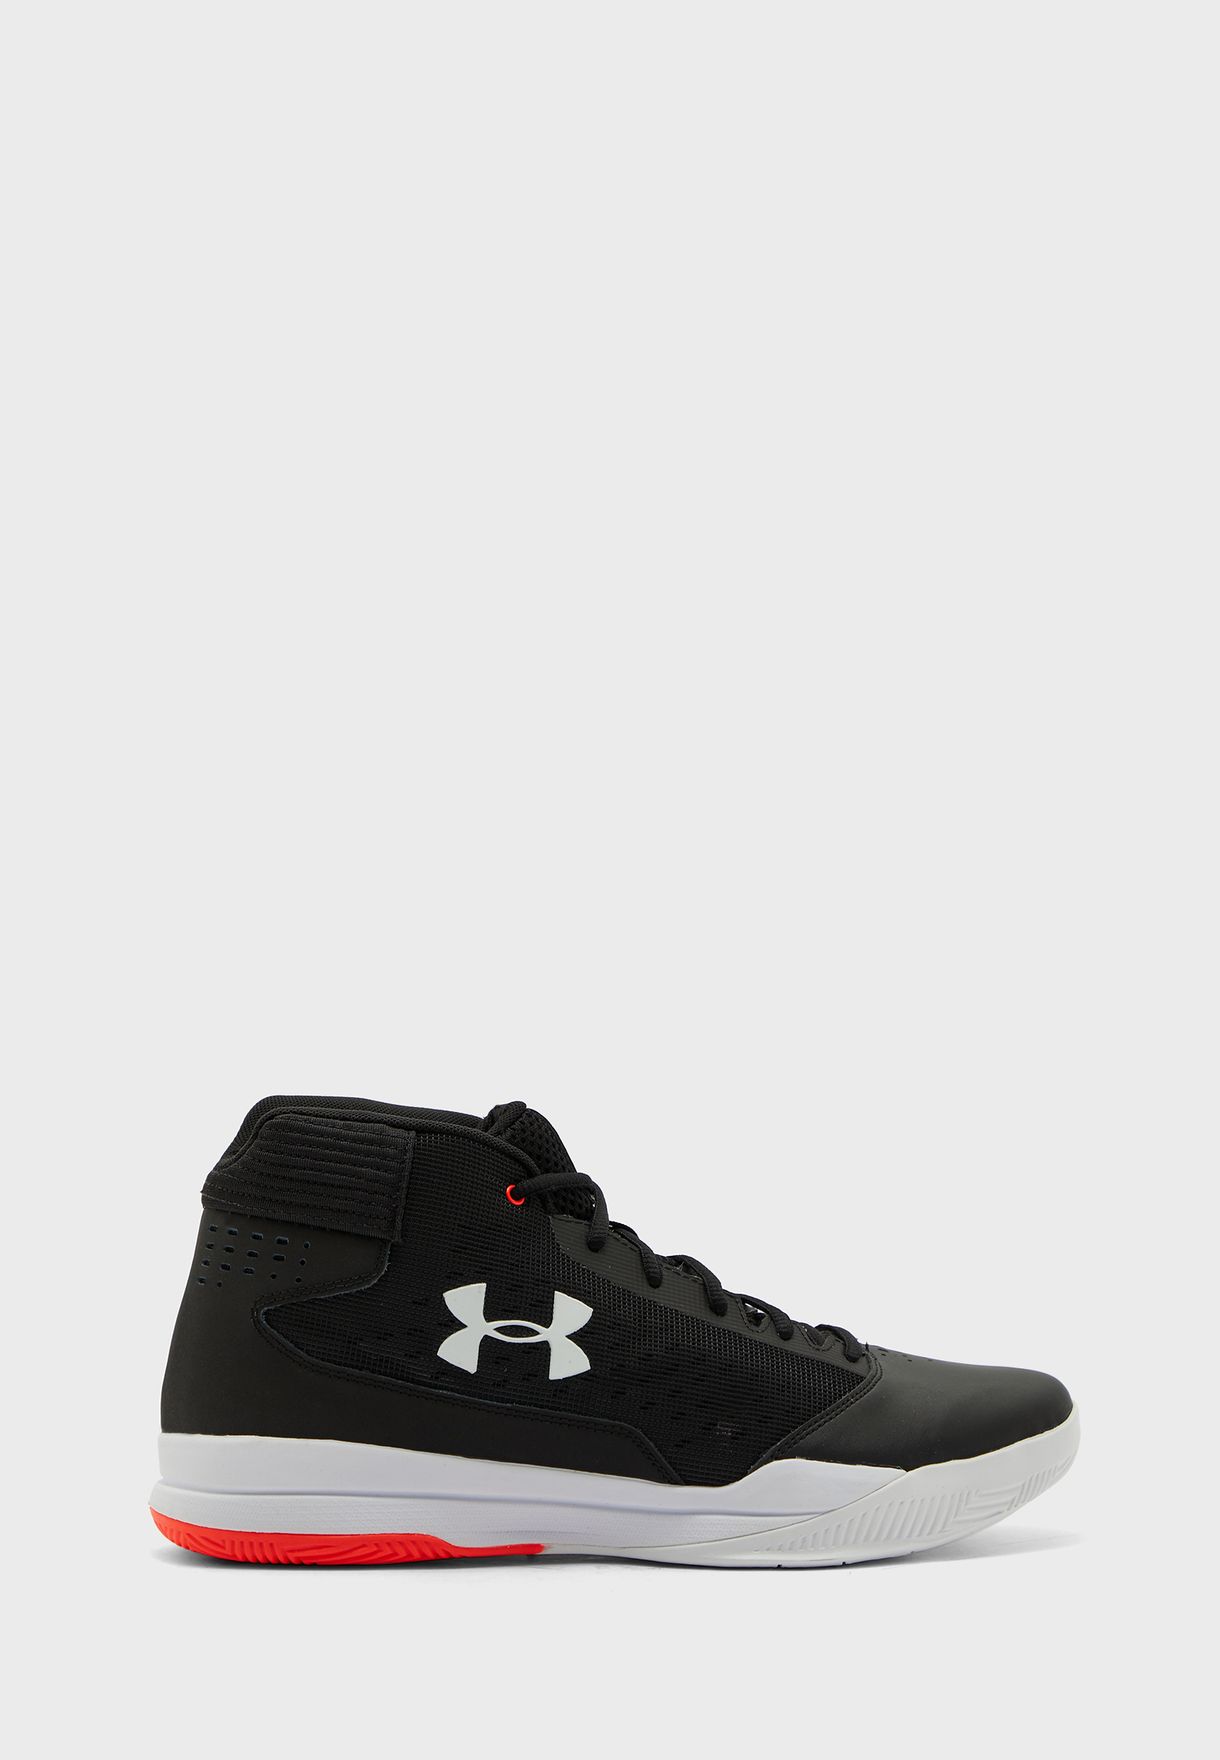 under armour shoes cash on delivery